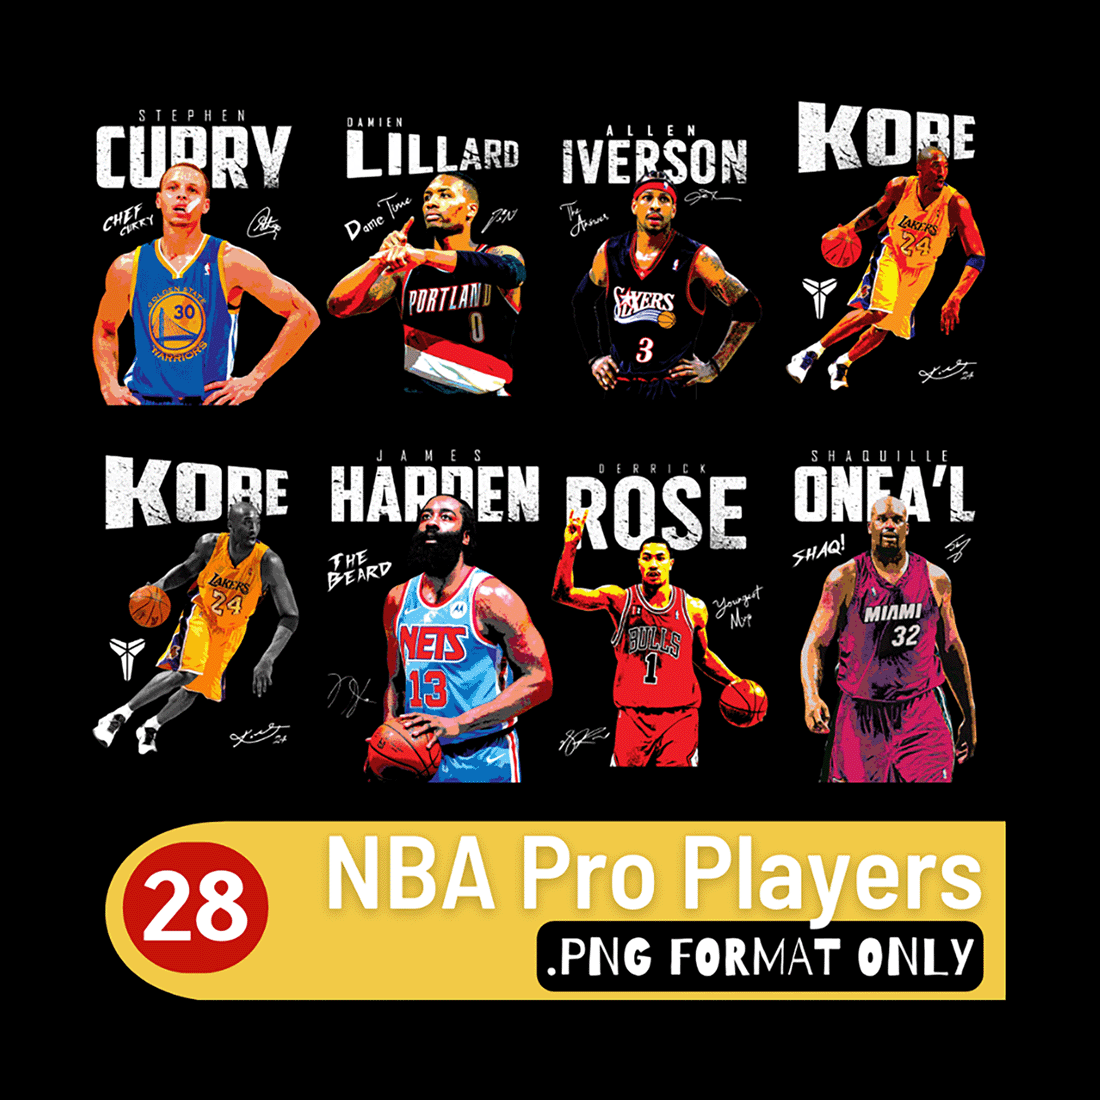 28 NBA Pro Player PNG at 6$ preview image.